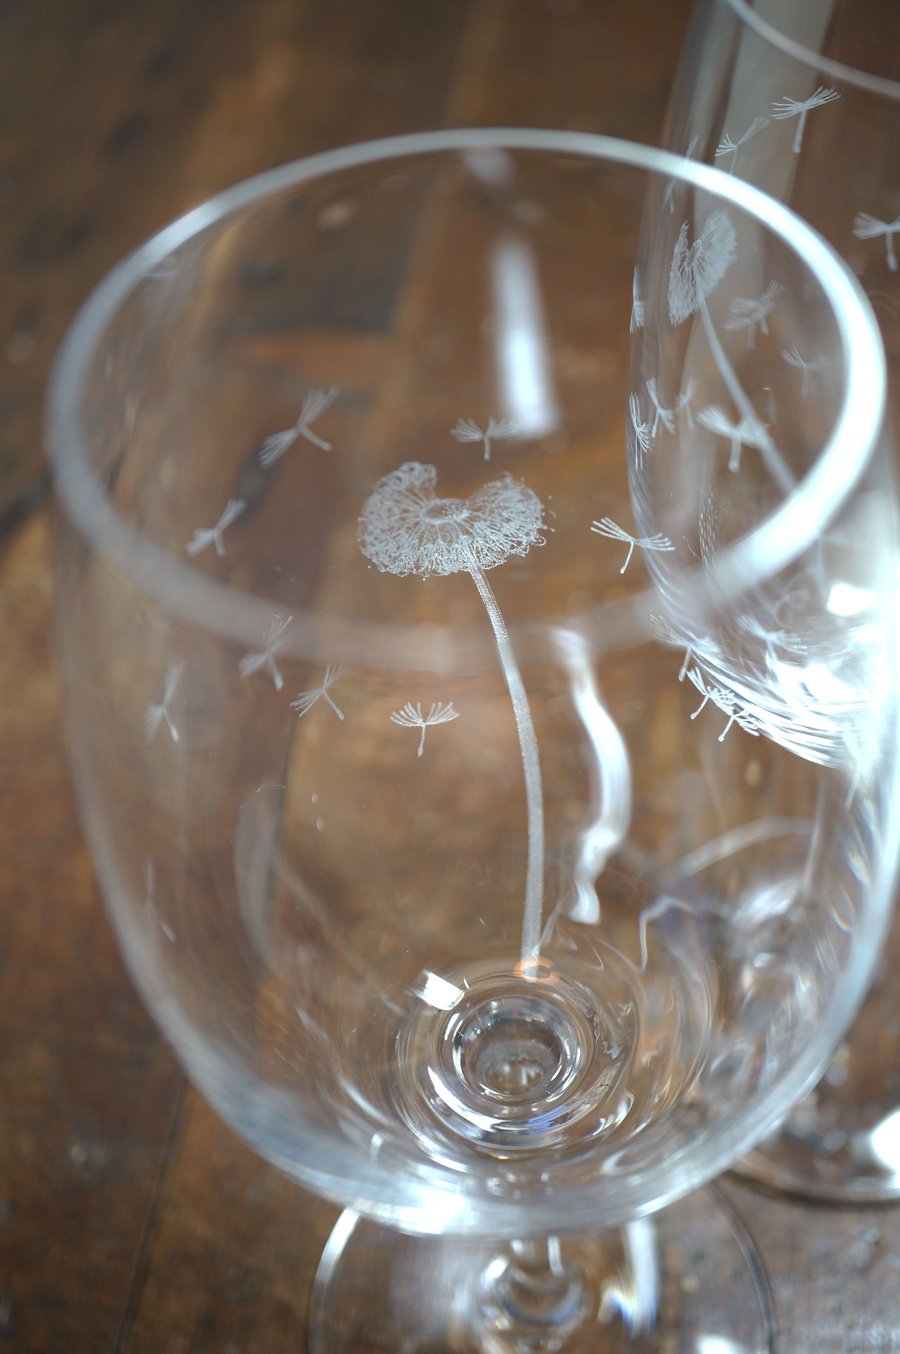 Pair of Hand Engraved Glasses, Dandelions on Crystal Glass